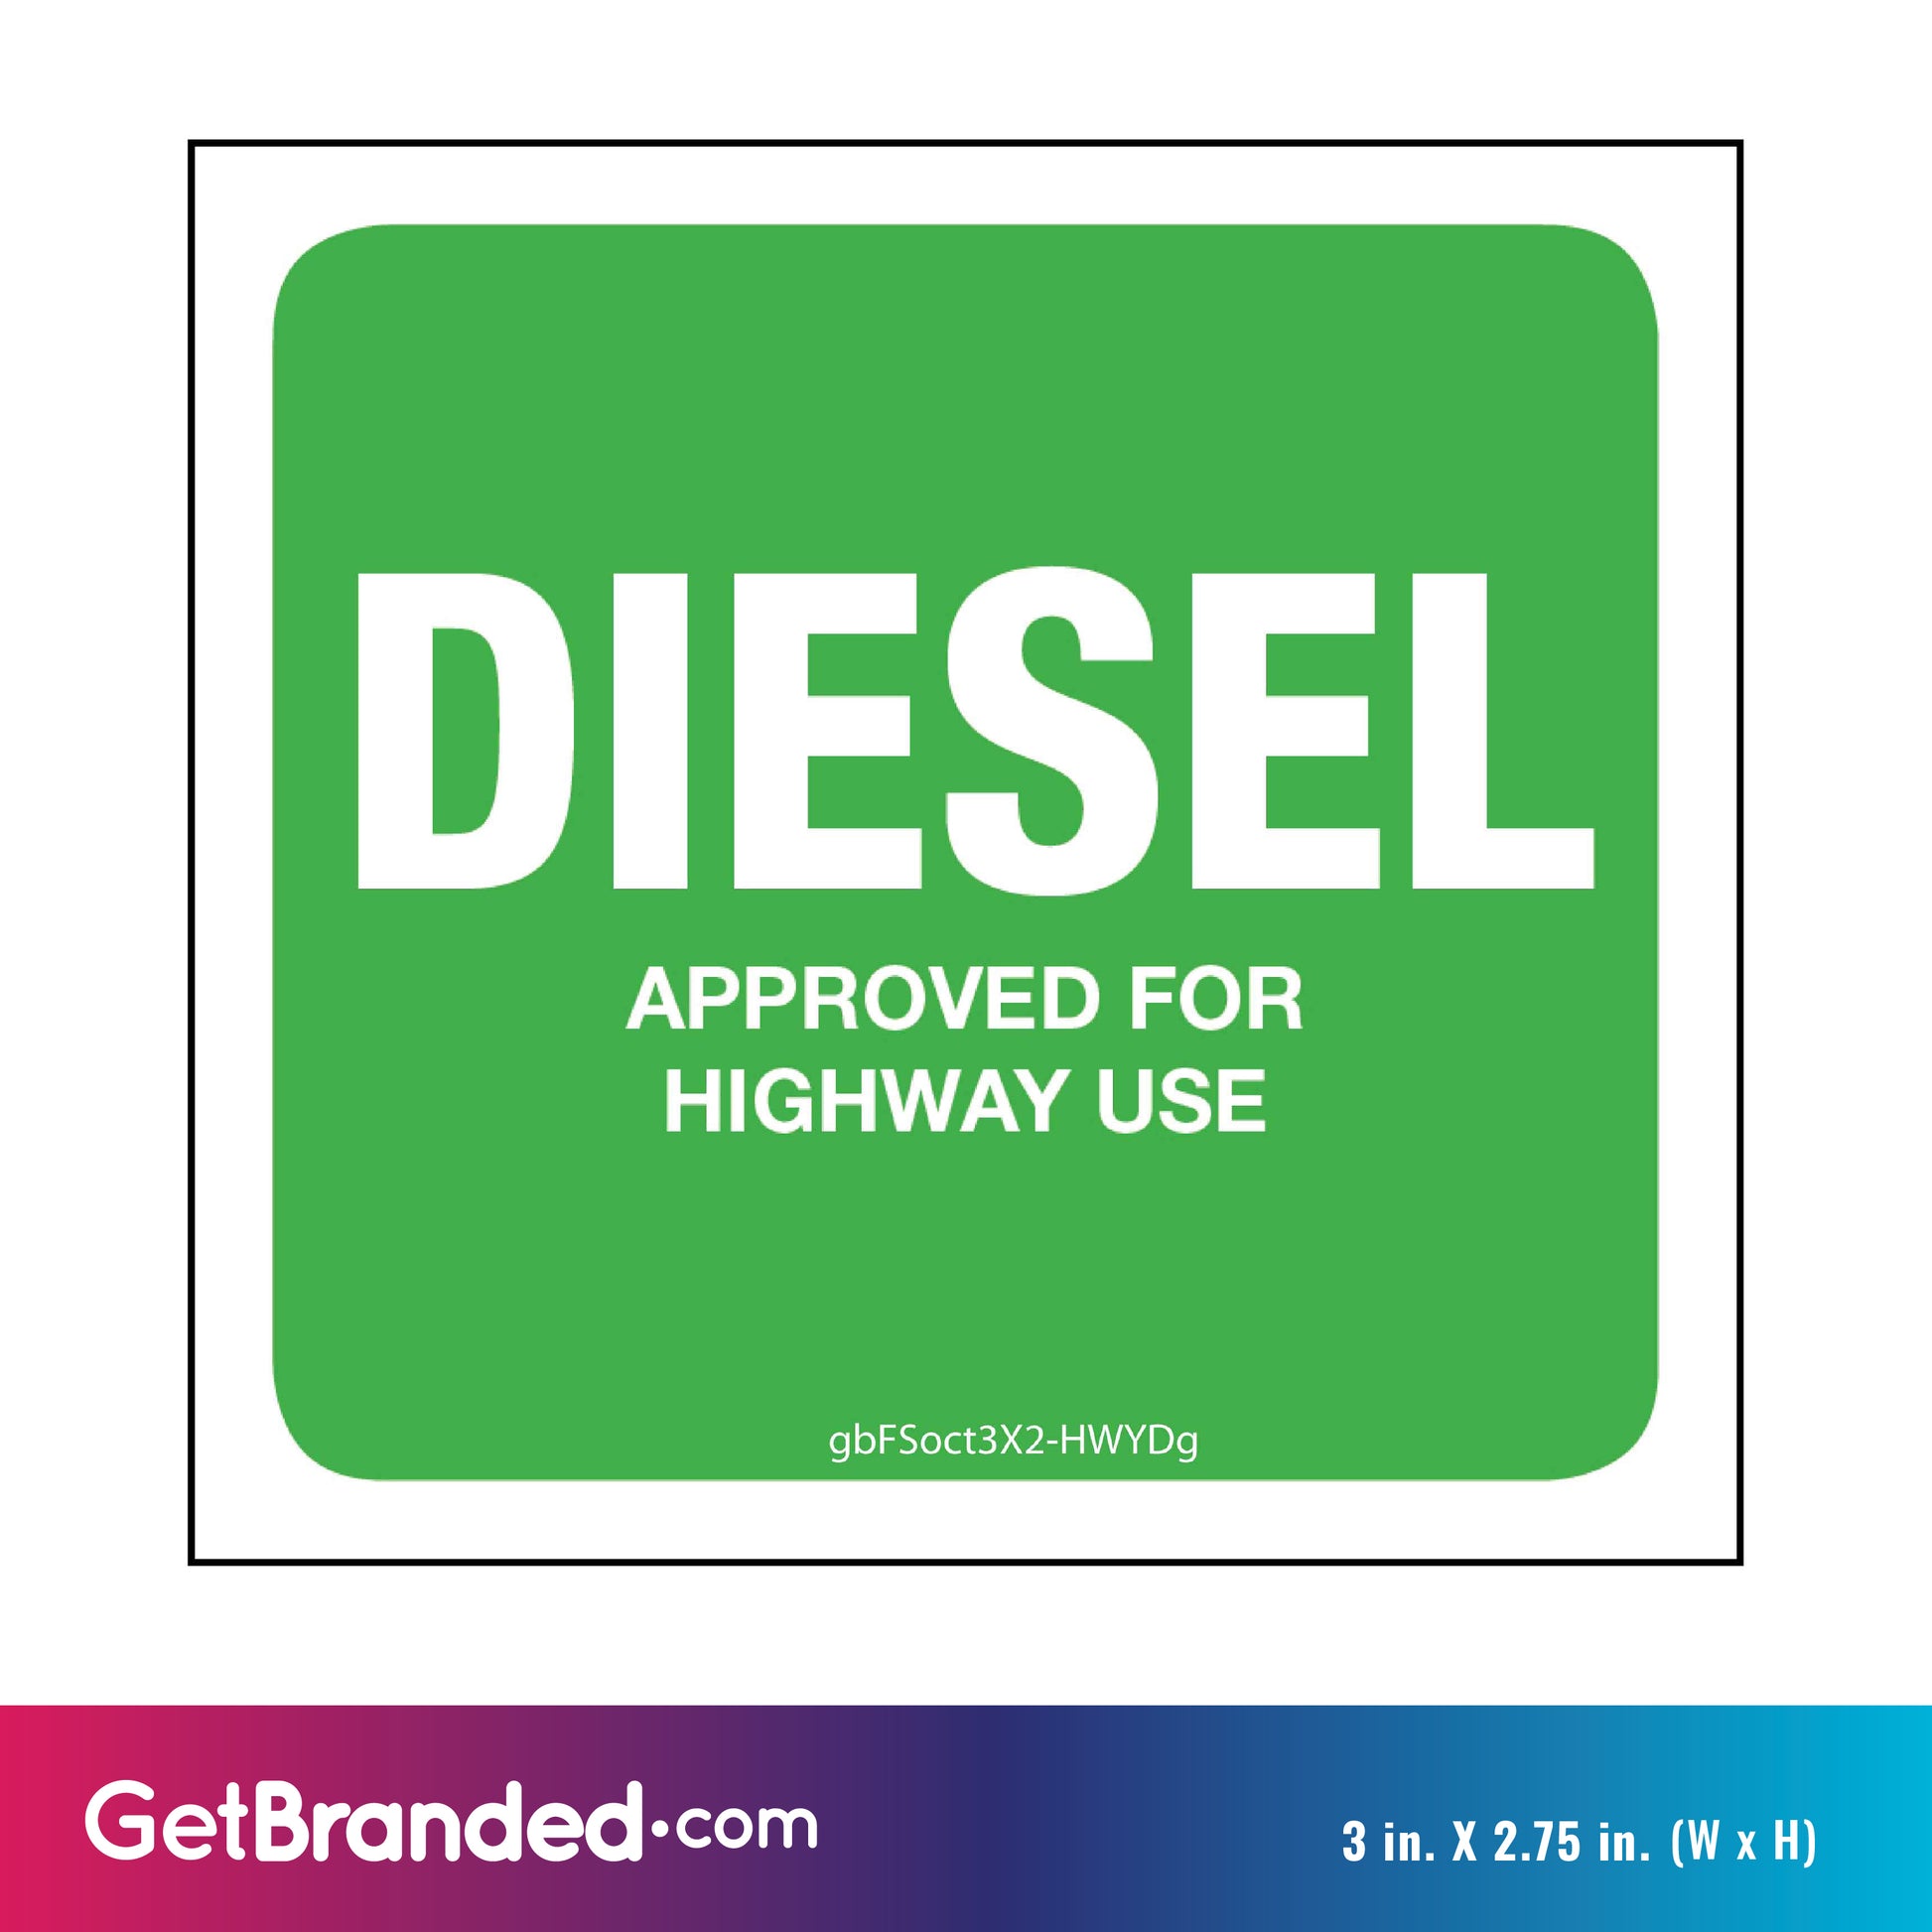 Diesel (On Road) Pump Decal, Green size guide